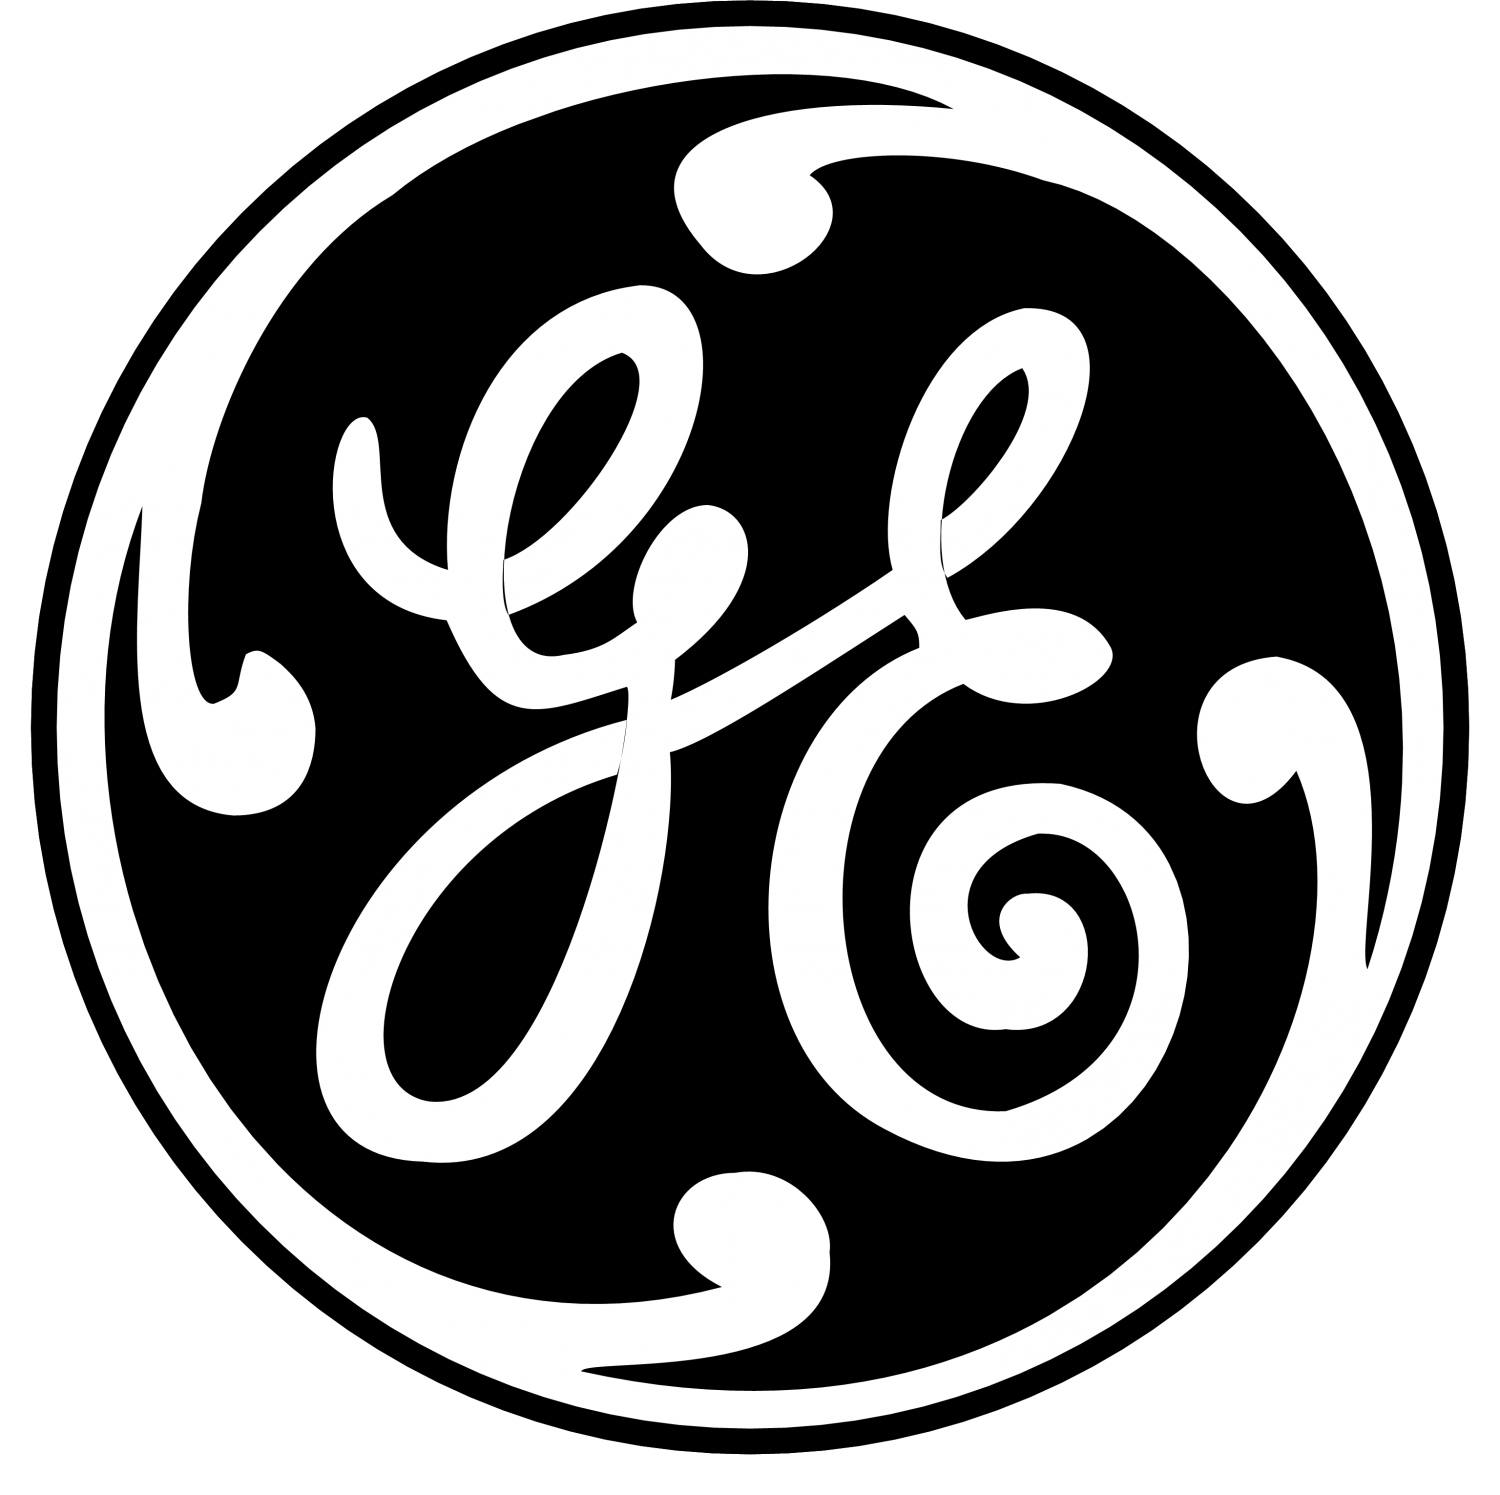 Small General Electric Logo - Wolong Acquires GE's Small Industrial Motors | COMPRESSORtech2